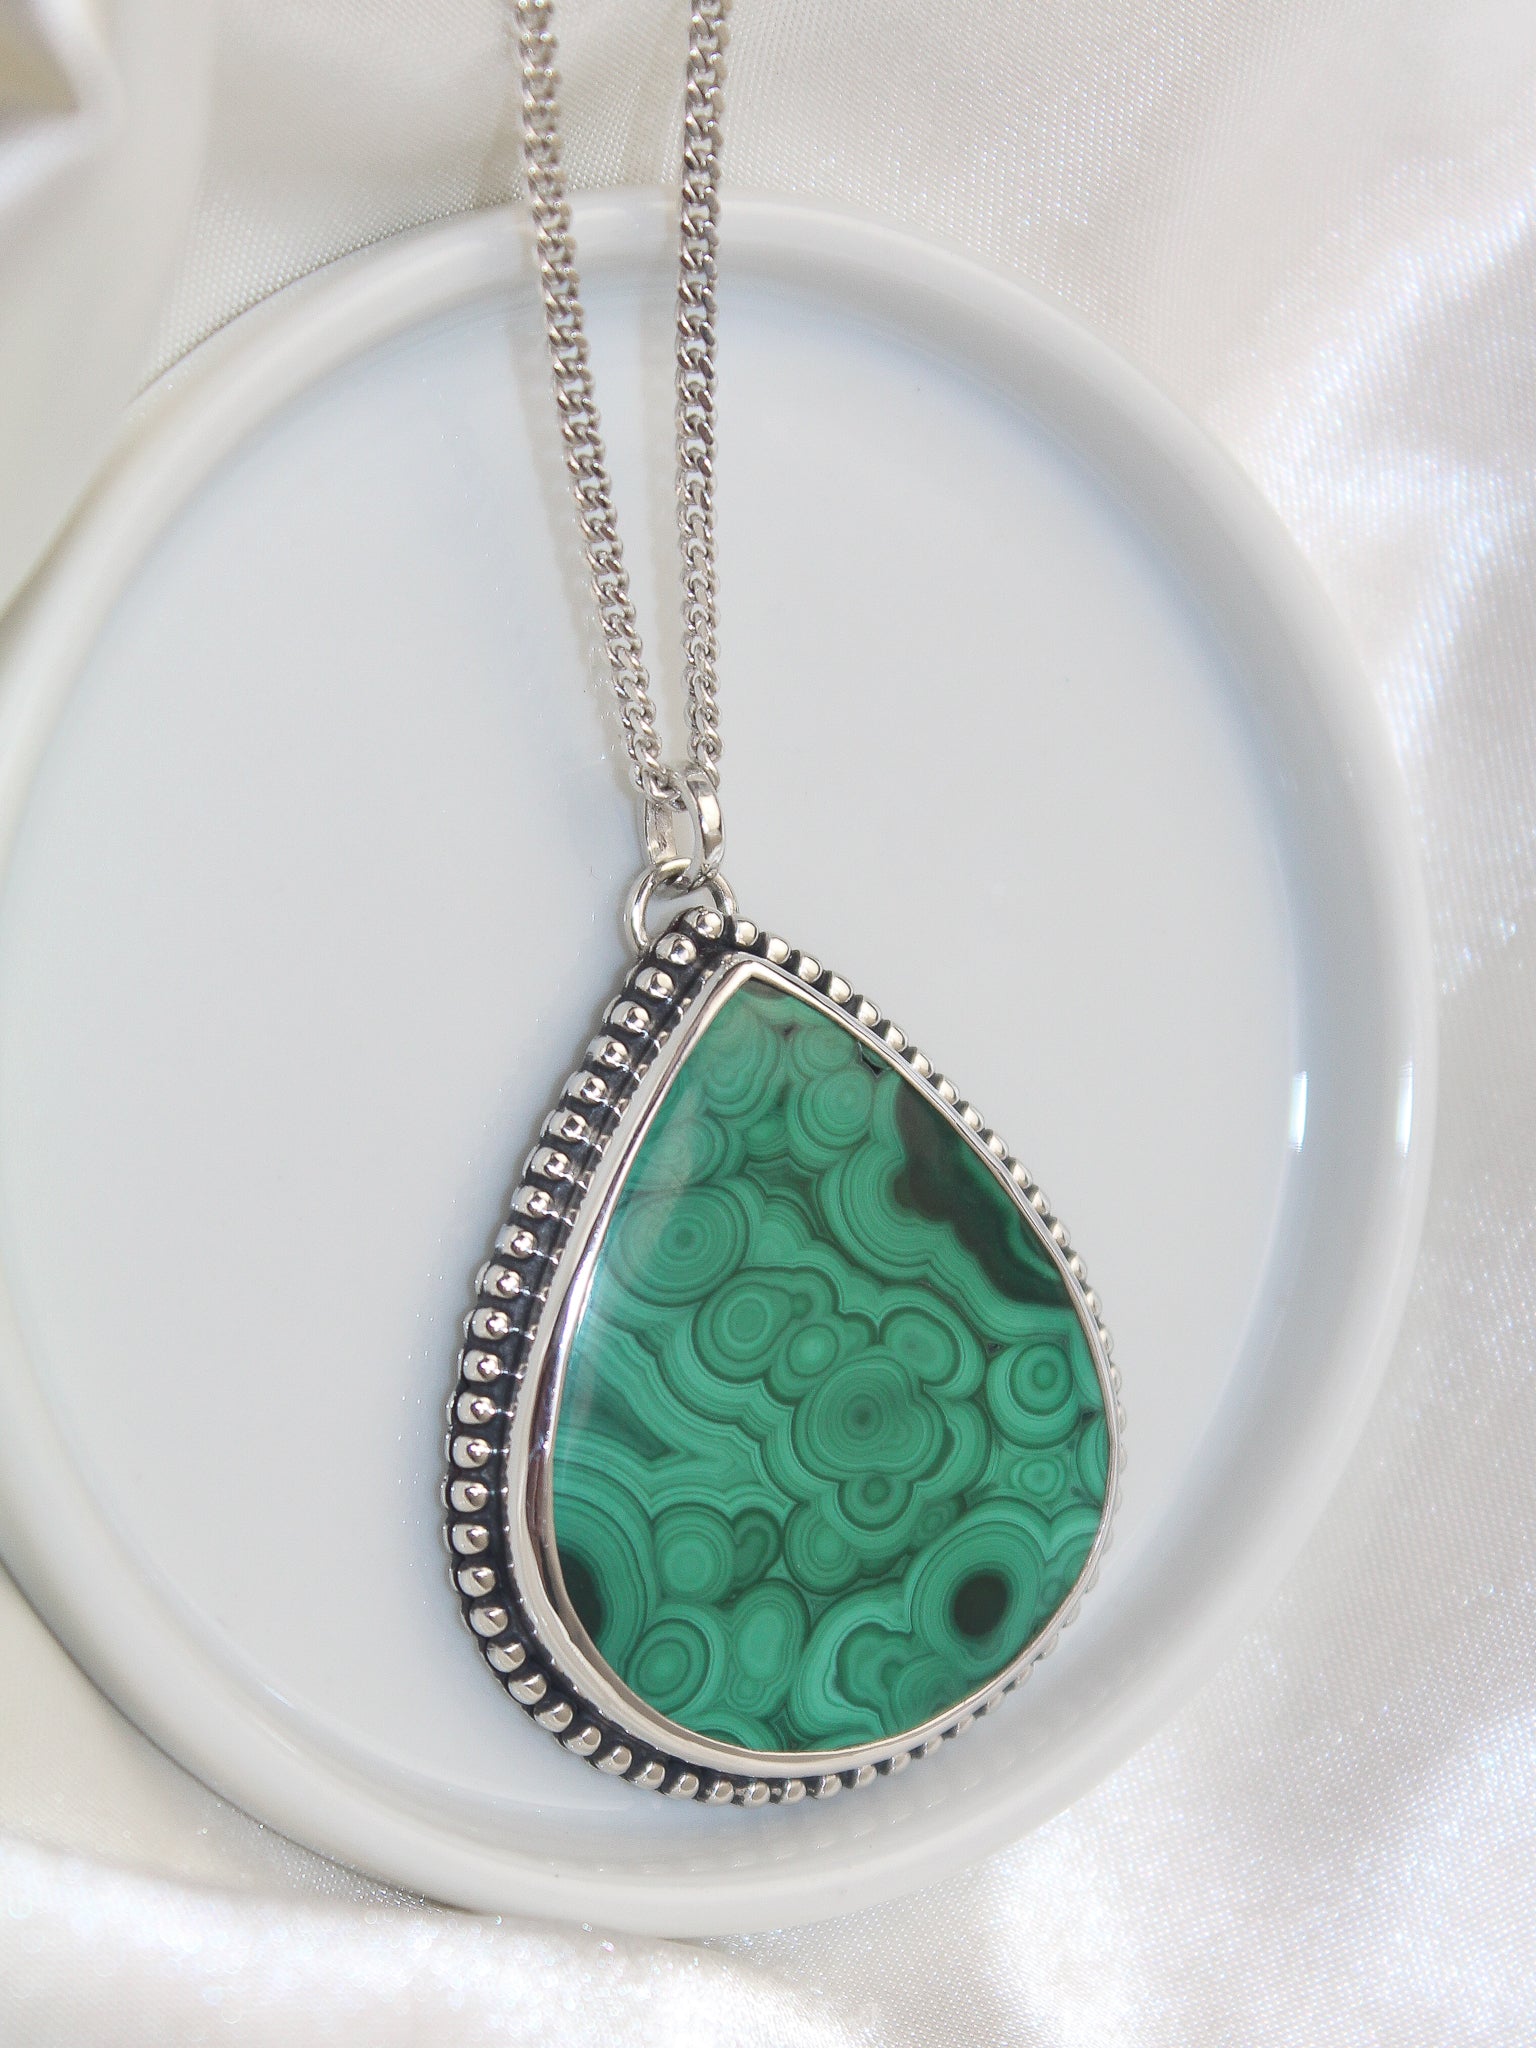 Handmade 925 sterling silver pendant with malachite stone with orbicular patterns lily and William jewelry 